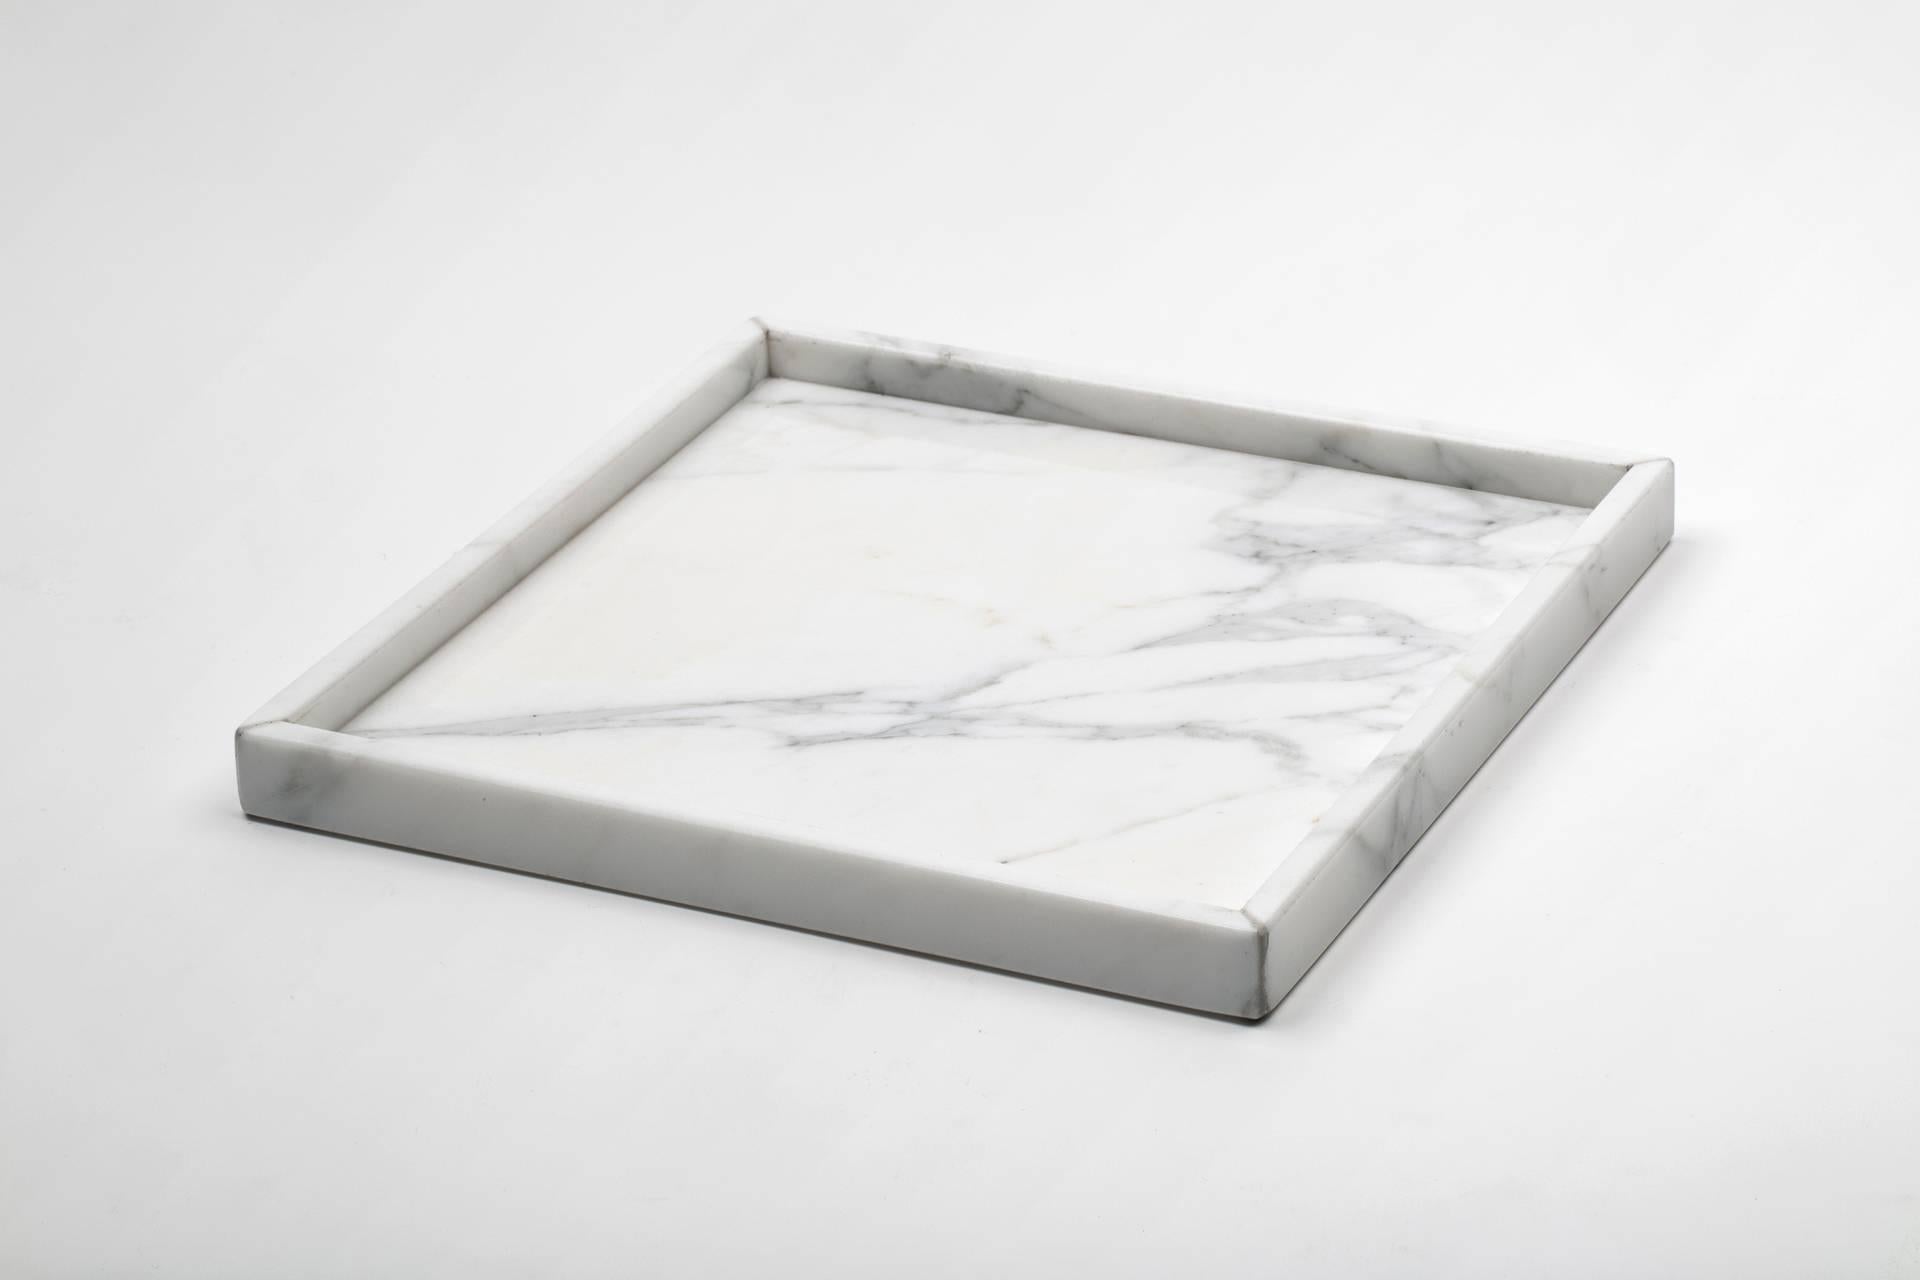 A set for the bathroom in white Carrara marble which includes: One rounded soap dispenser (diameter 9 x 19.5 cm), one rounded toothbrush holder (diameter 7 x 12 cm), one spa tray (26.5 x 26.5 x 2 cm).
Each piece is in a way unique (every marble